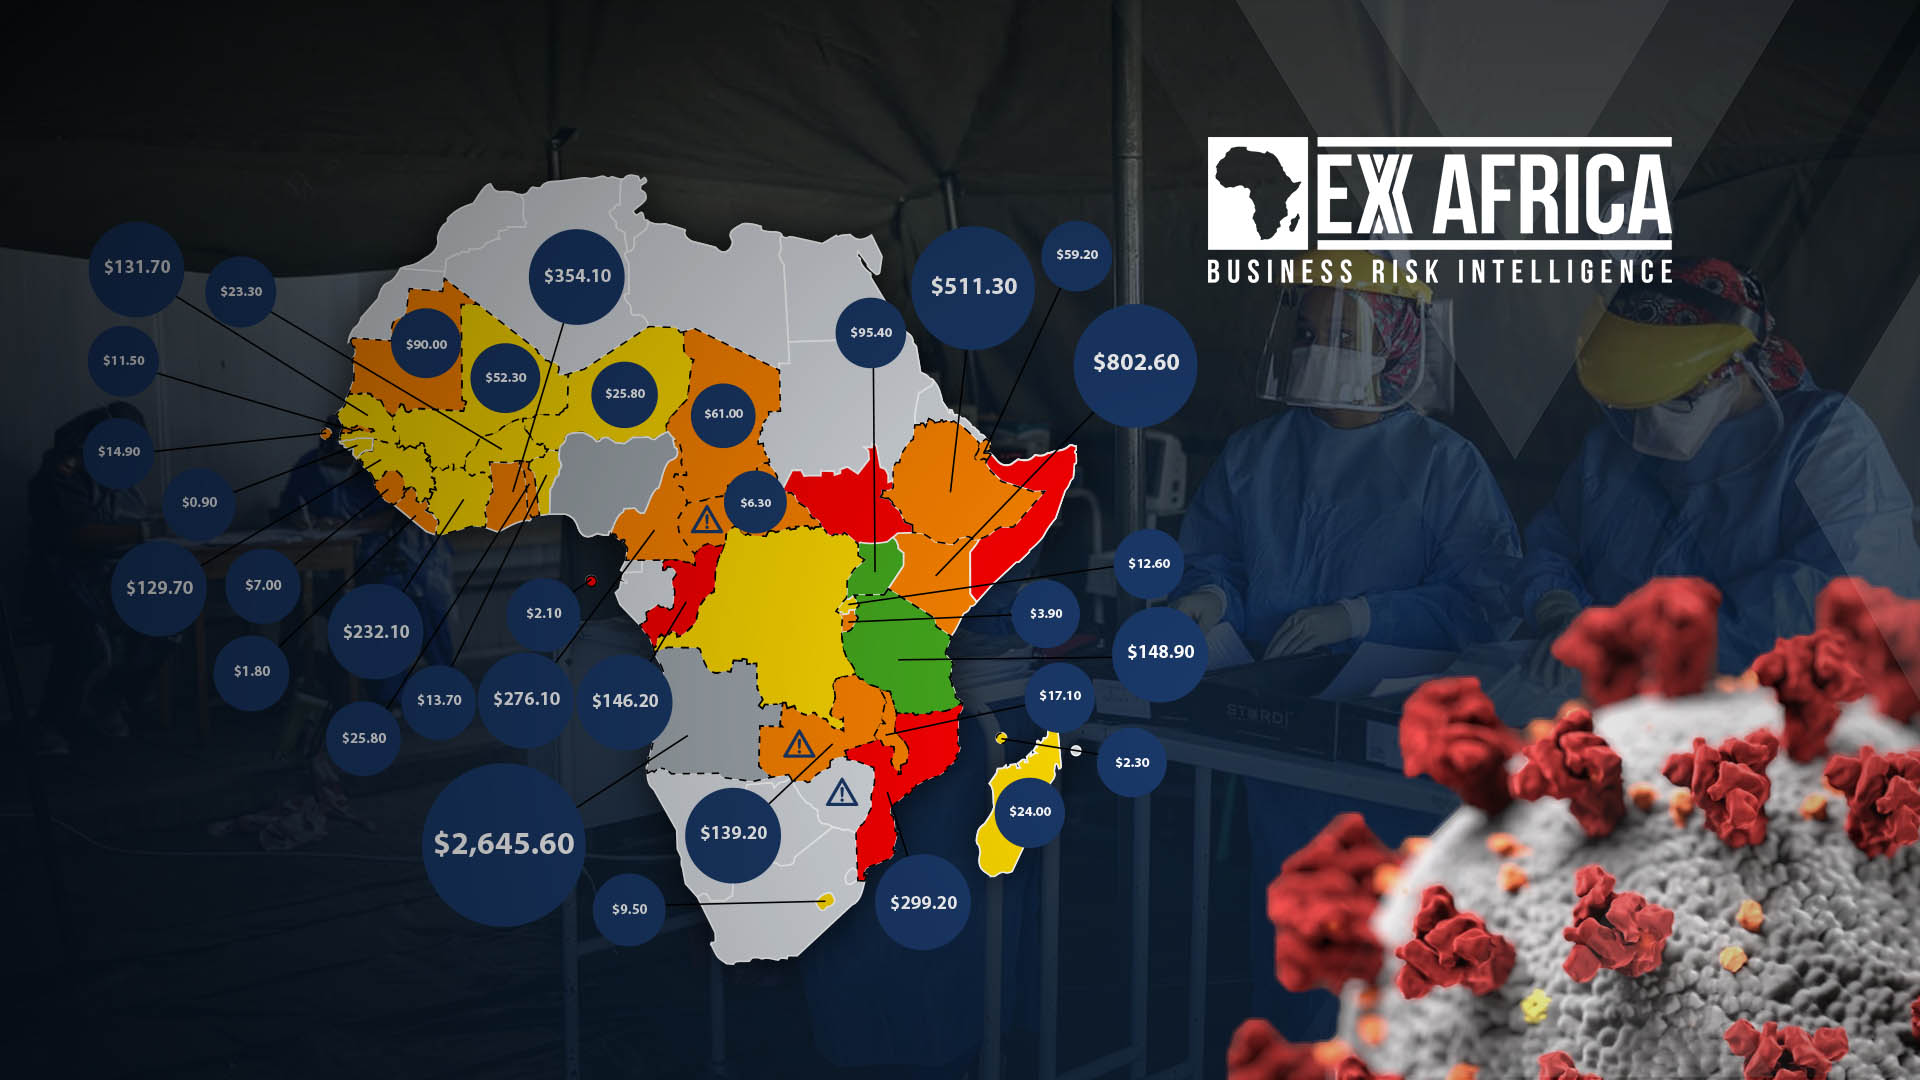 SPECIAL REPORT: TOWARDS ONE MILLION INFECTIONS IN AFRICA